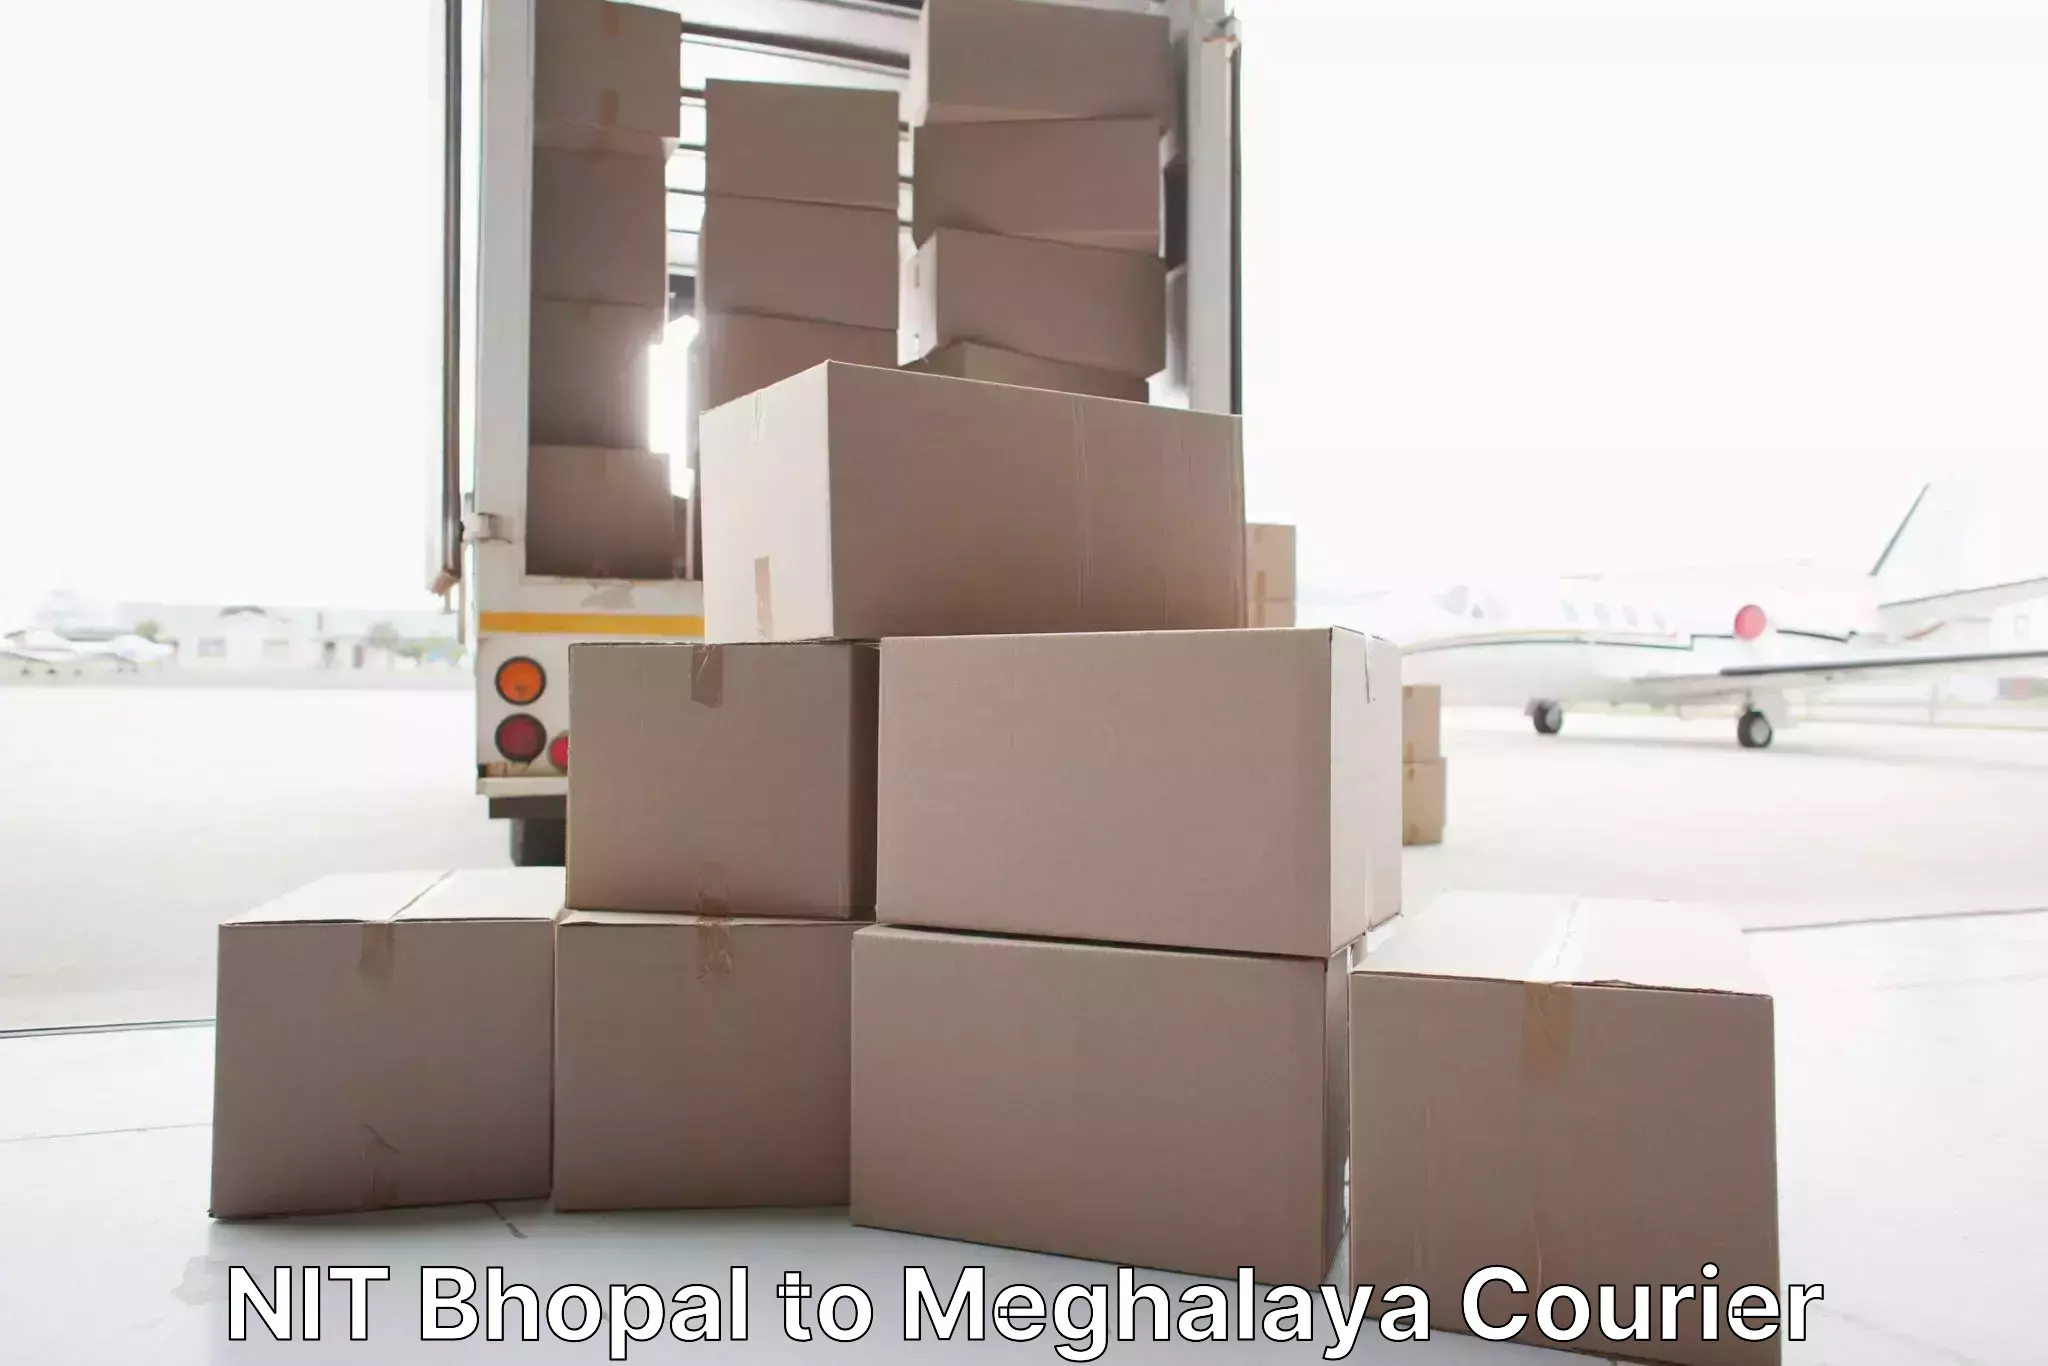 Professional moving company NIT Bhopal to Tura